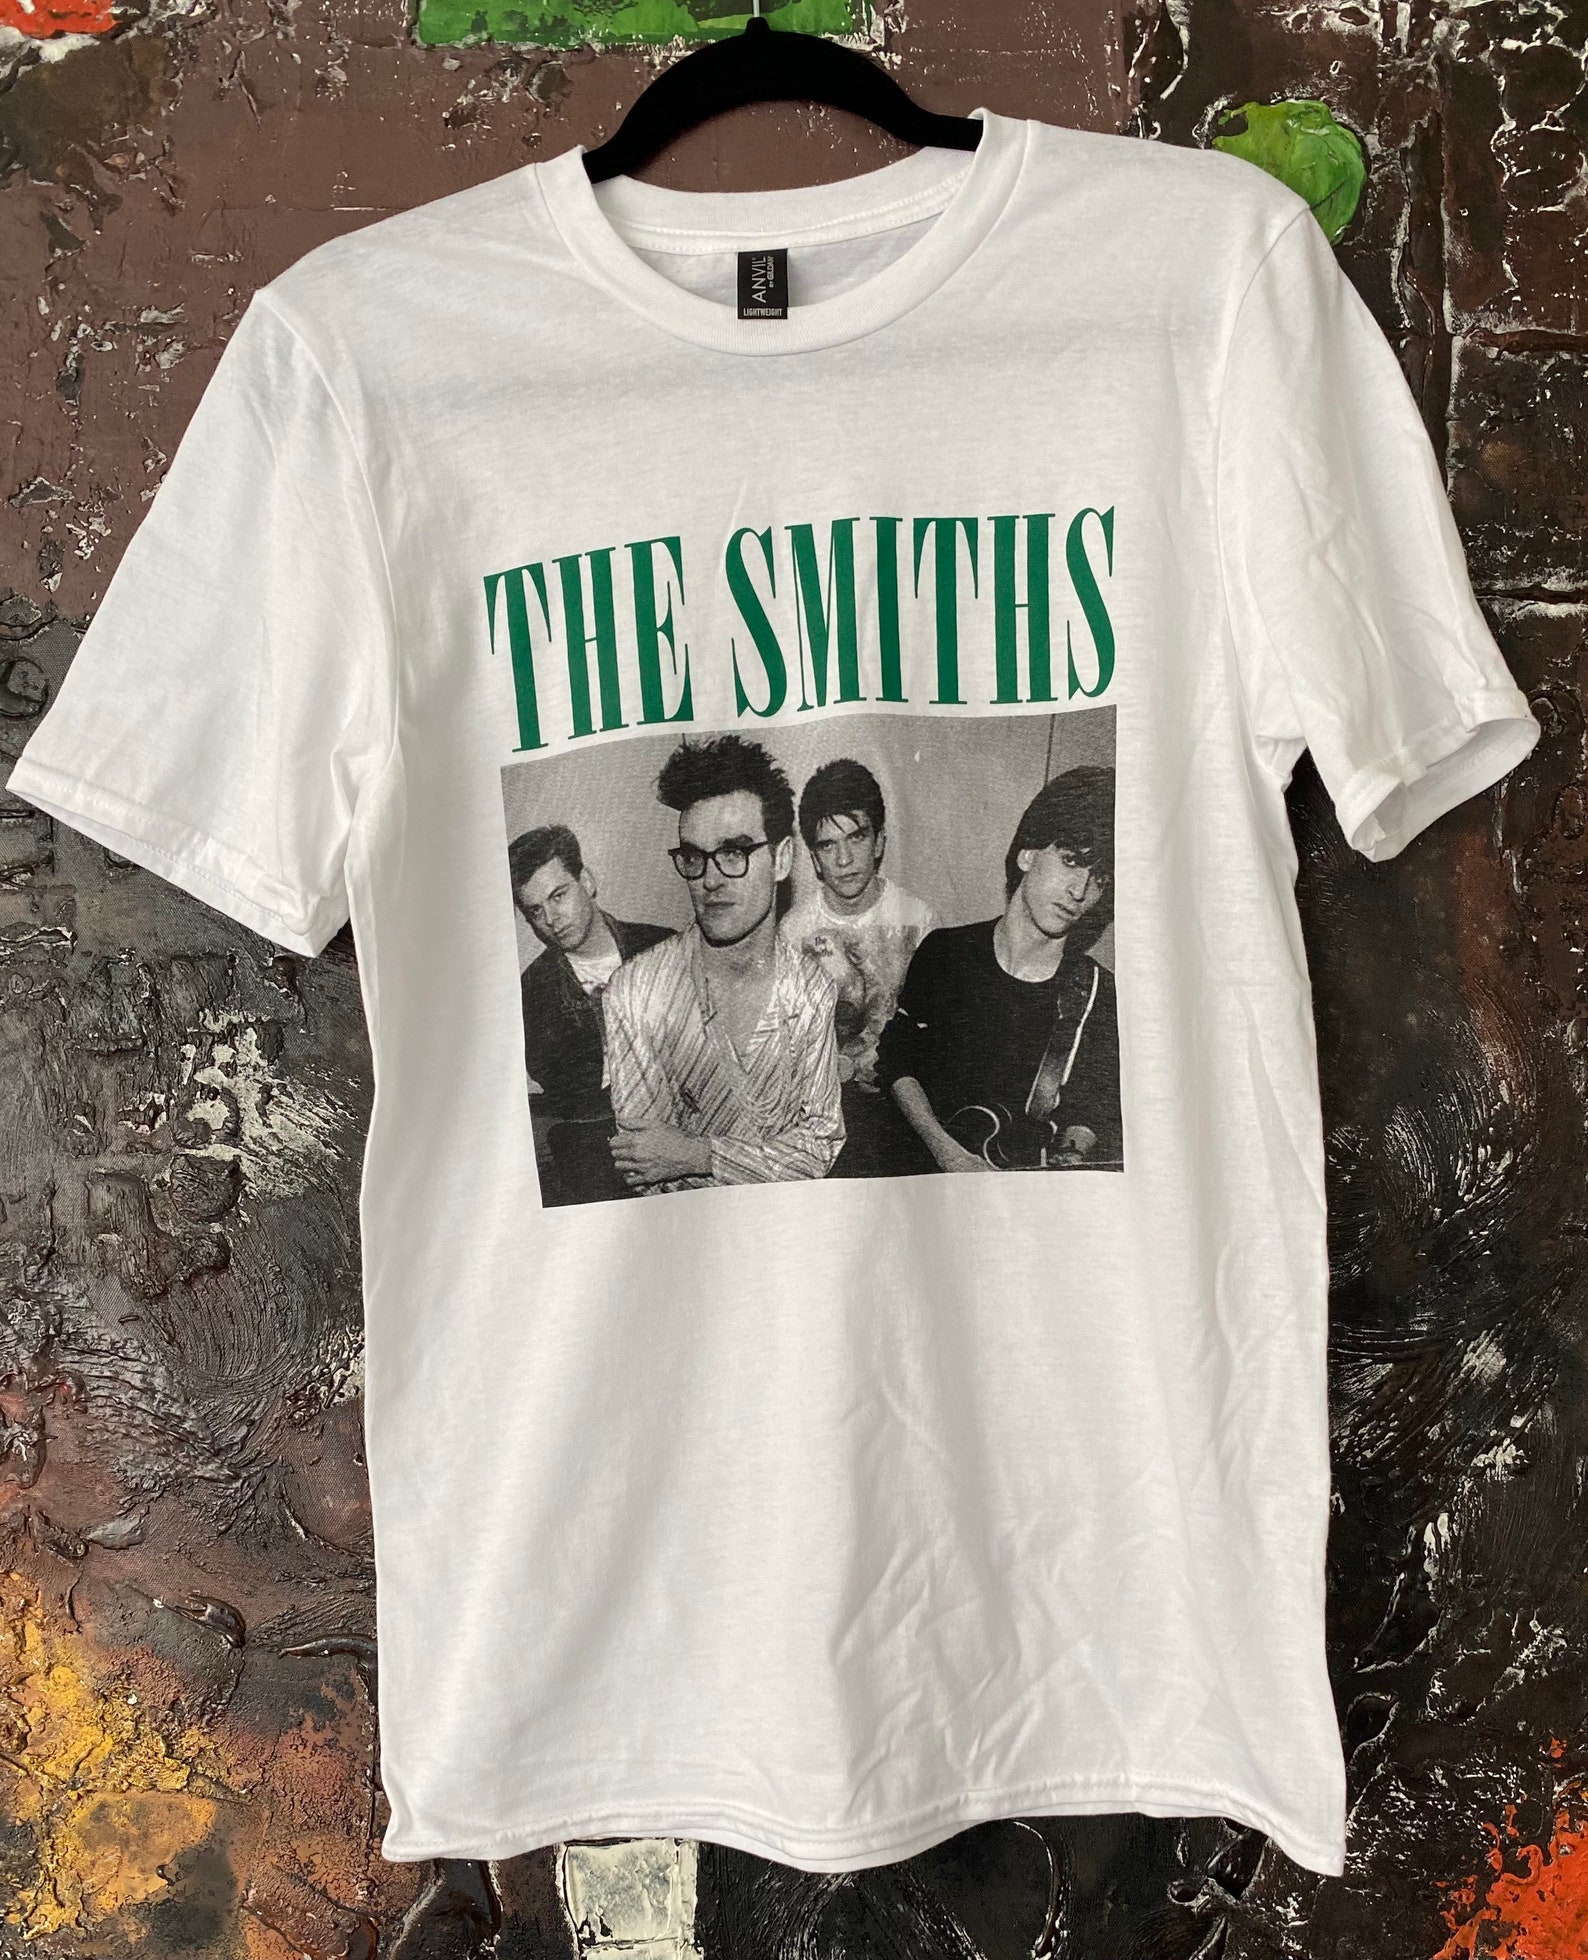 In white The Smiths t shirt | Etsy